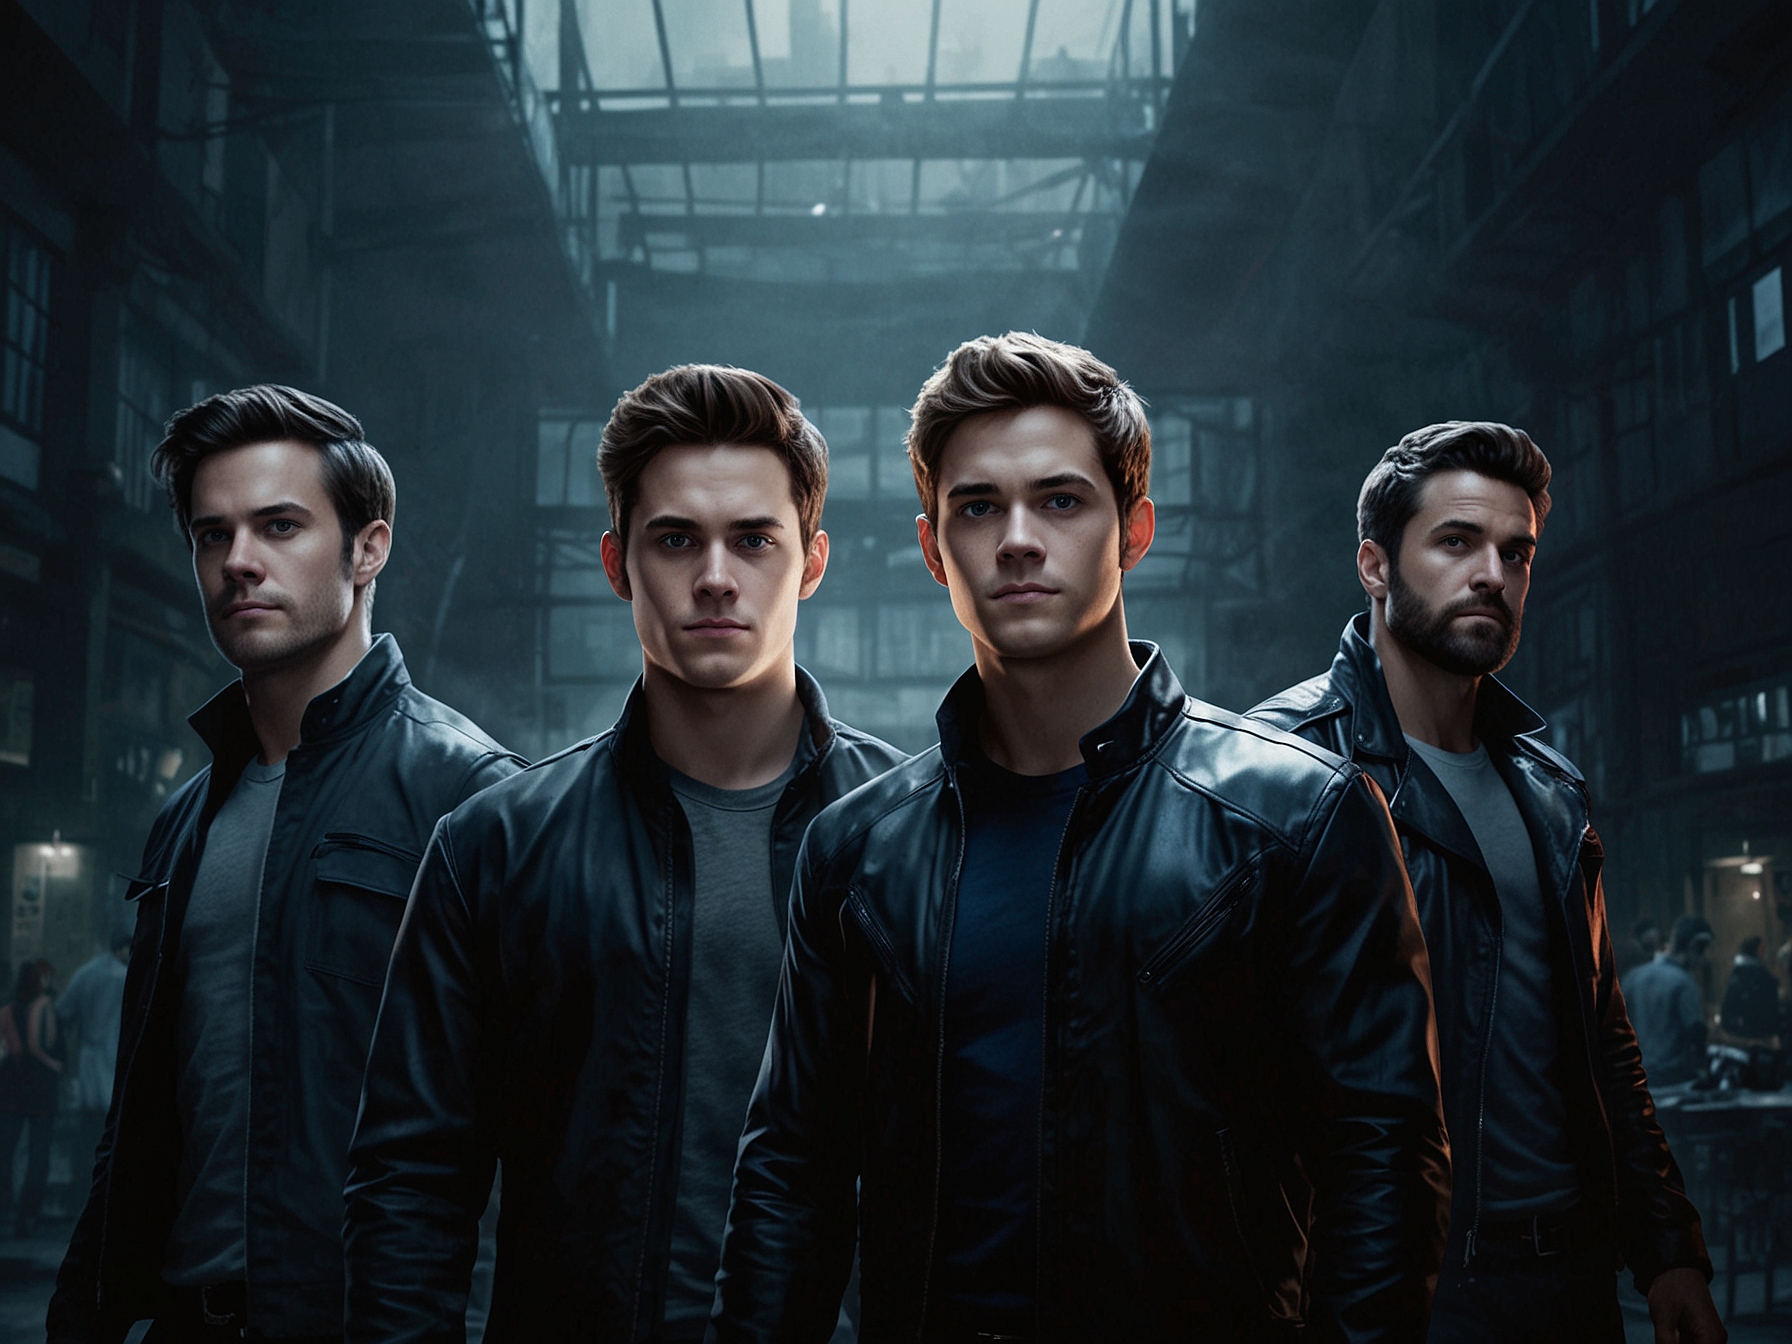 A promotional poster of The Boys Season 4 featuring the main characters, emphasizing the show's darker, grittier take on superheroes, reflecting the series' growing popularity and critical acclaim.